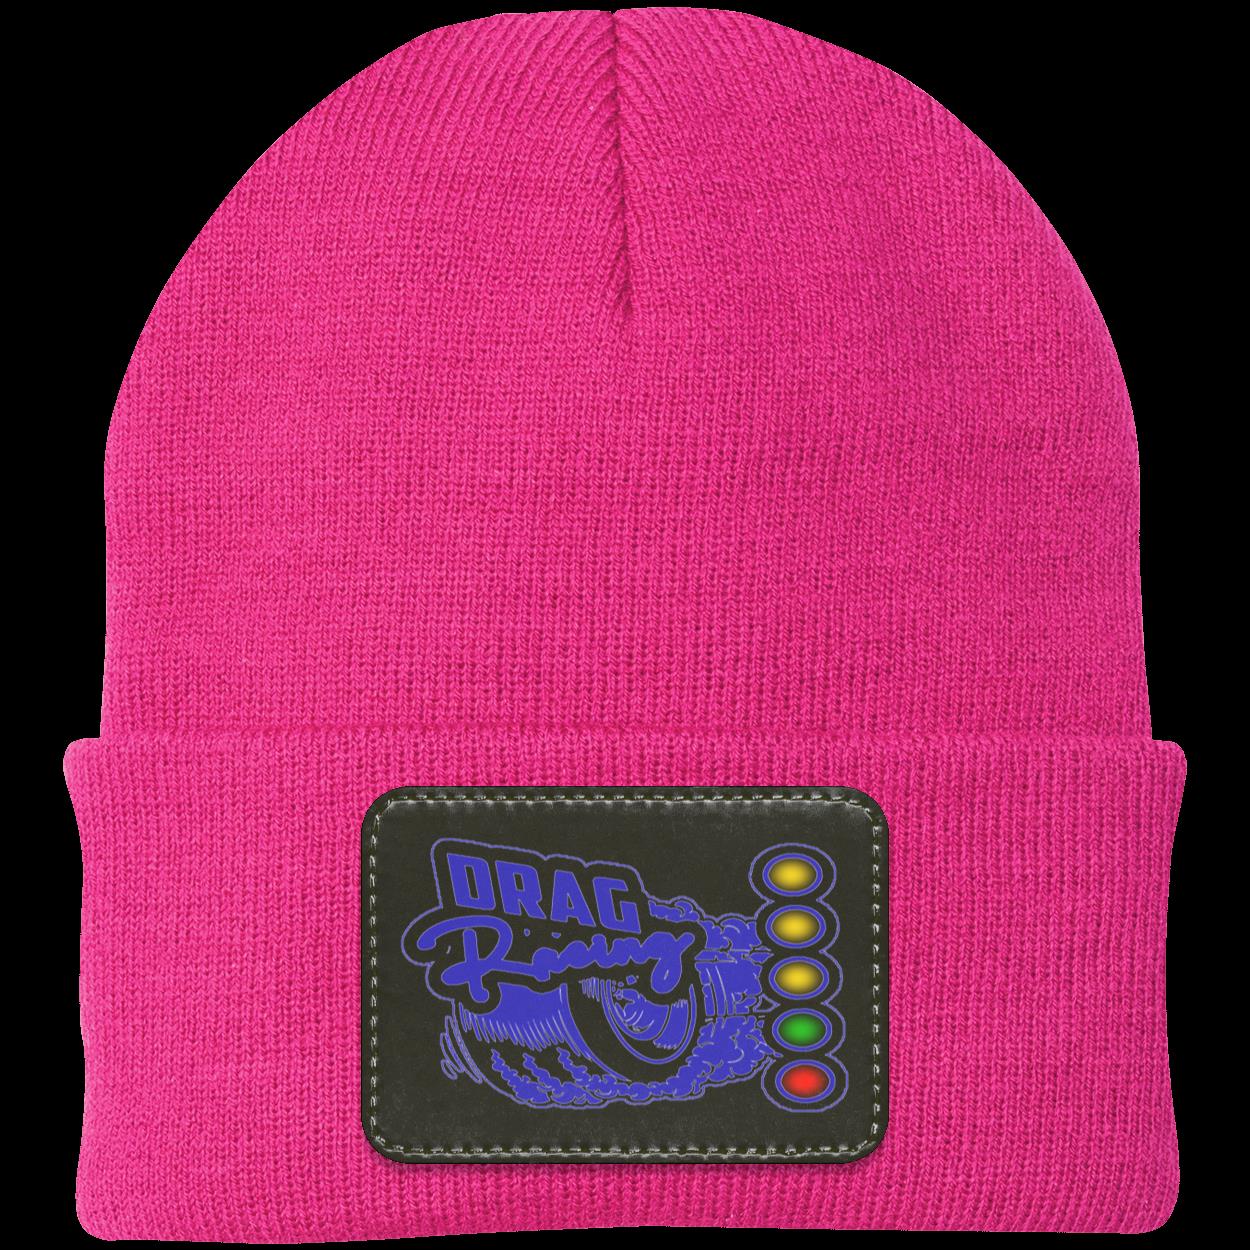 Drag Racing Patched Knit Cap V7